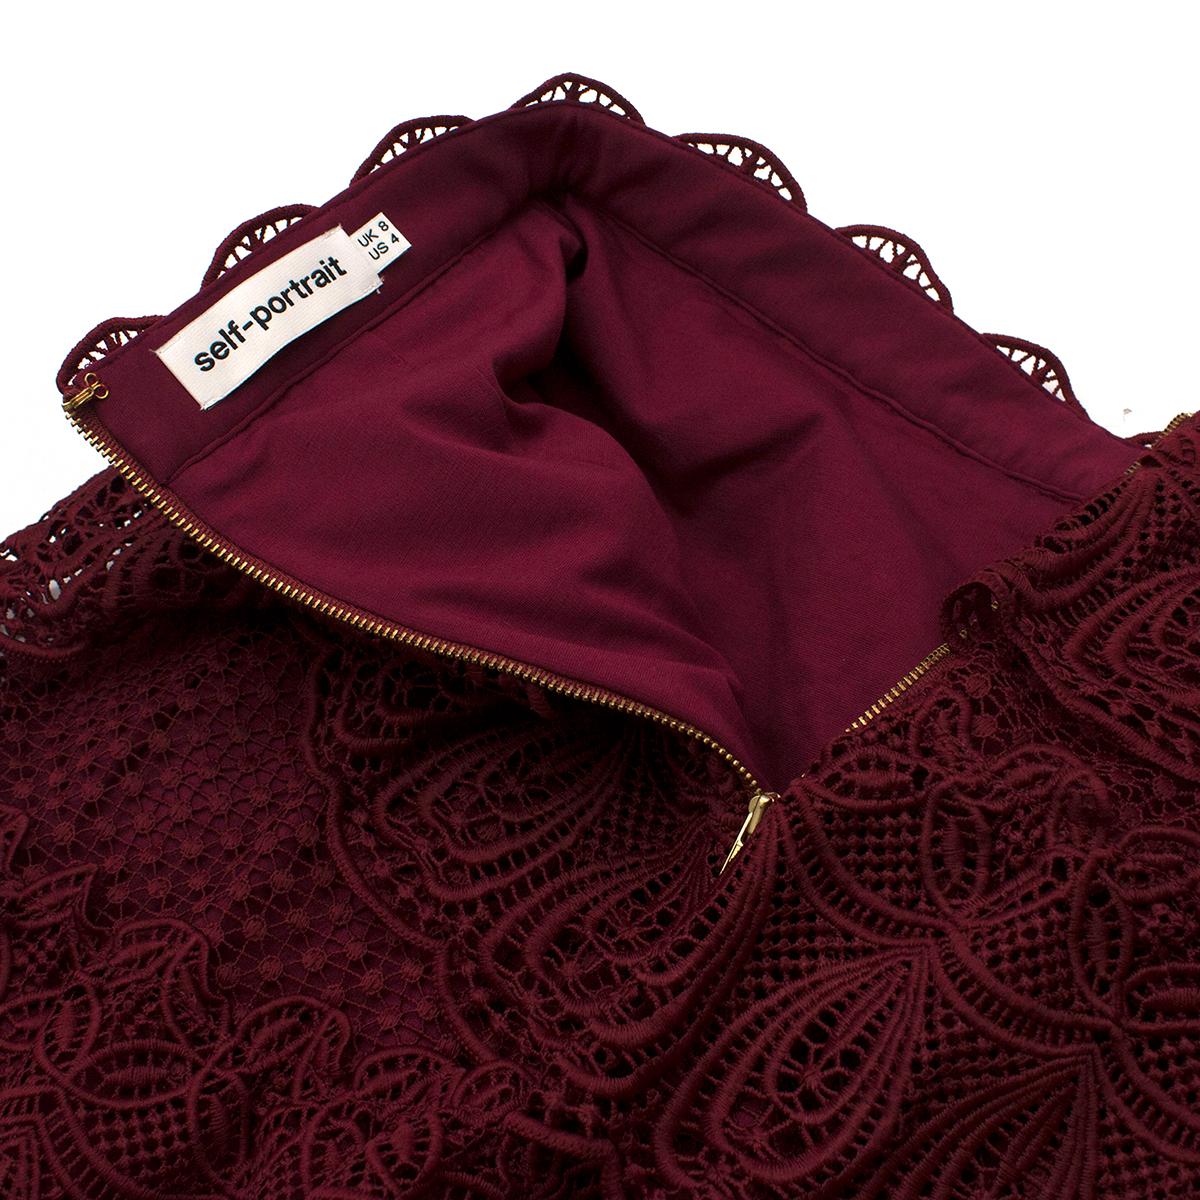 Self Portrait Burgundy Tiered Lace Skirt

- Burgundy mini skirt
- Lightweight
- Lace
- Tiered ruffle trim
- Centre-back hook-and-eye and zip fastening
- Scalloped hem
- 100% polyester. Lining: 65% rayon & 35% polyamide.

Please note, these items are